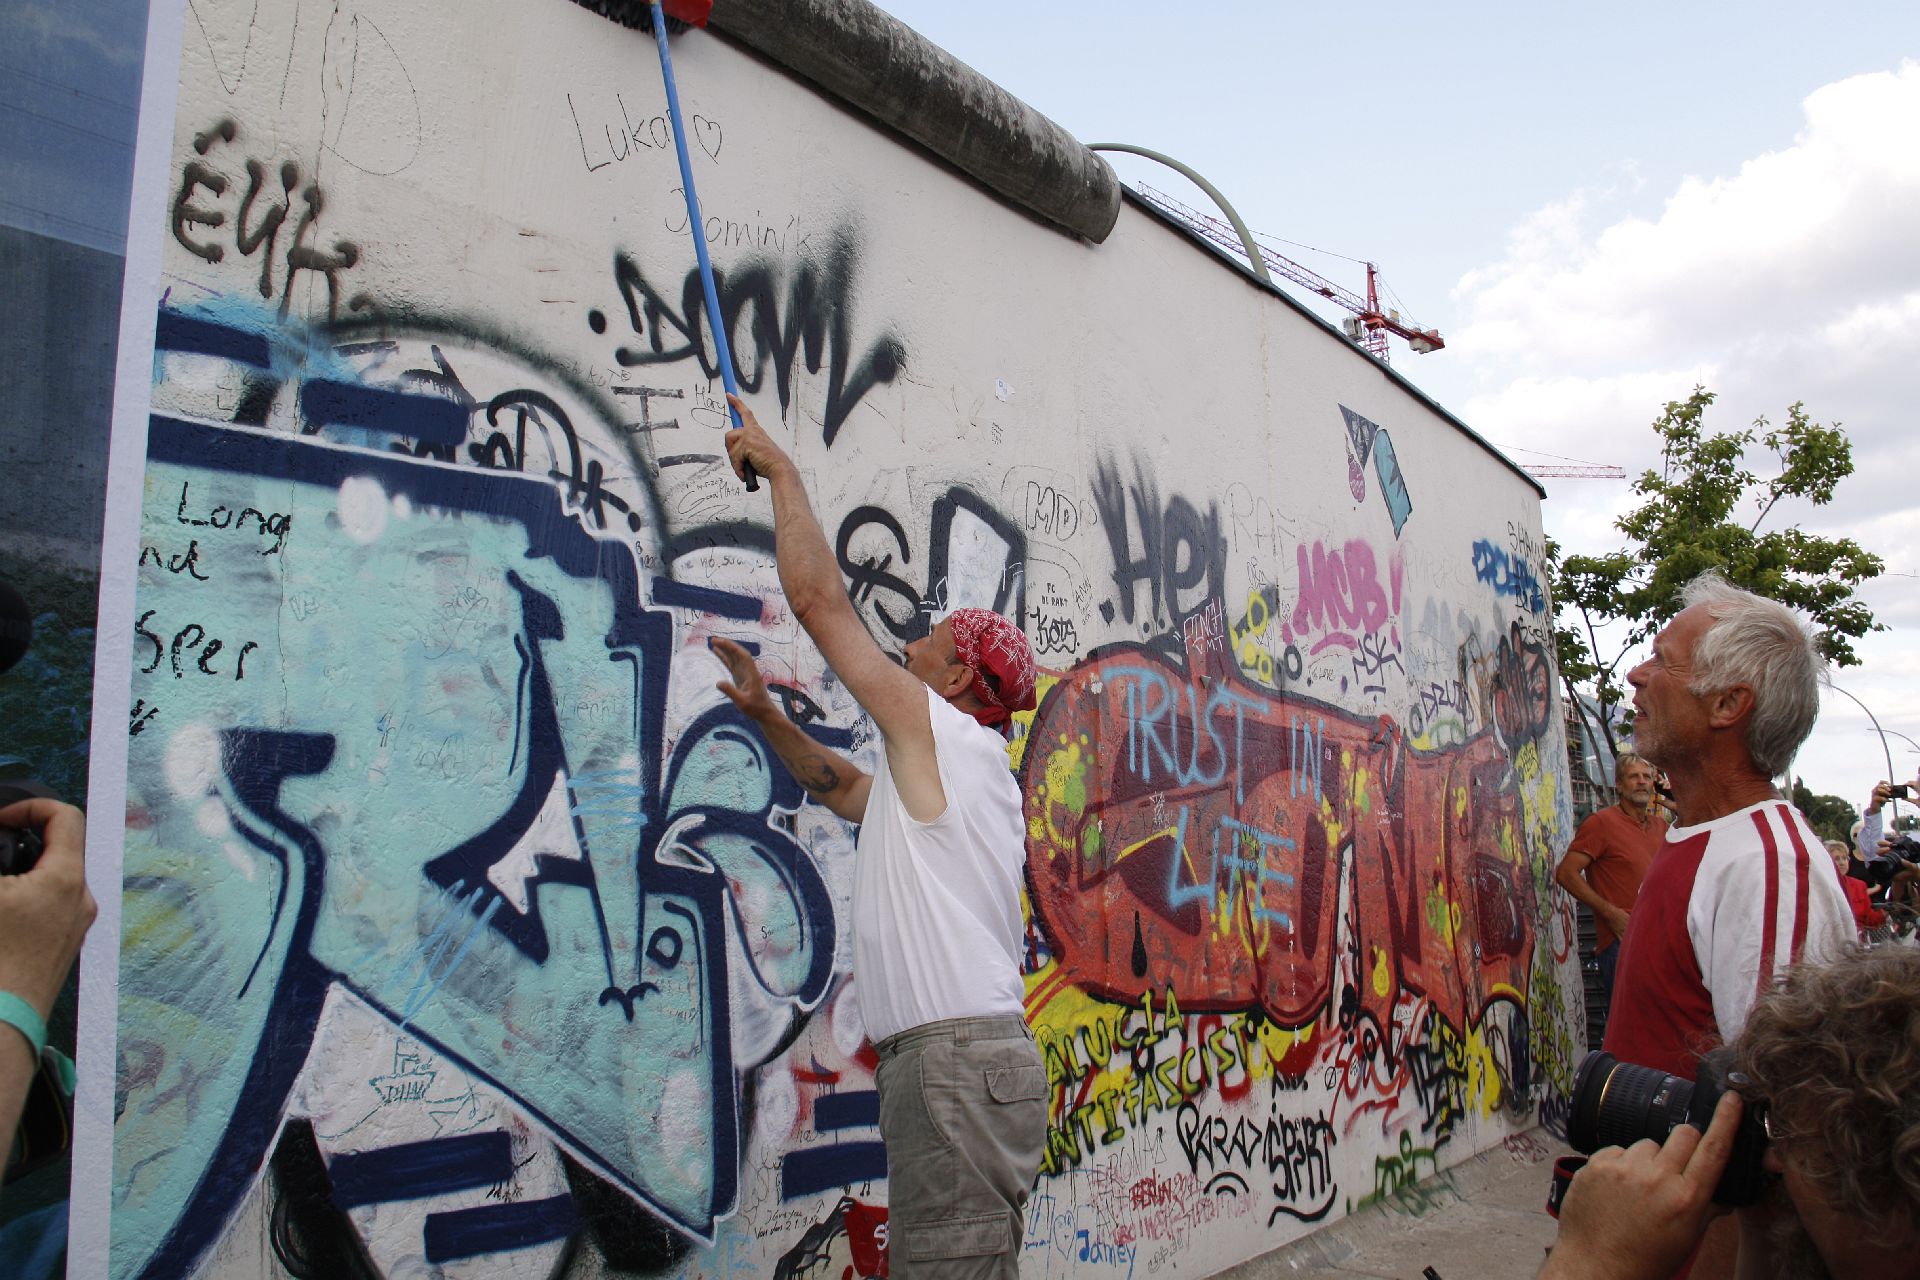 a man painting on a wall with graffiti